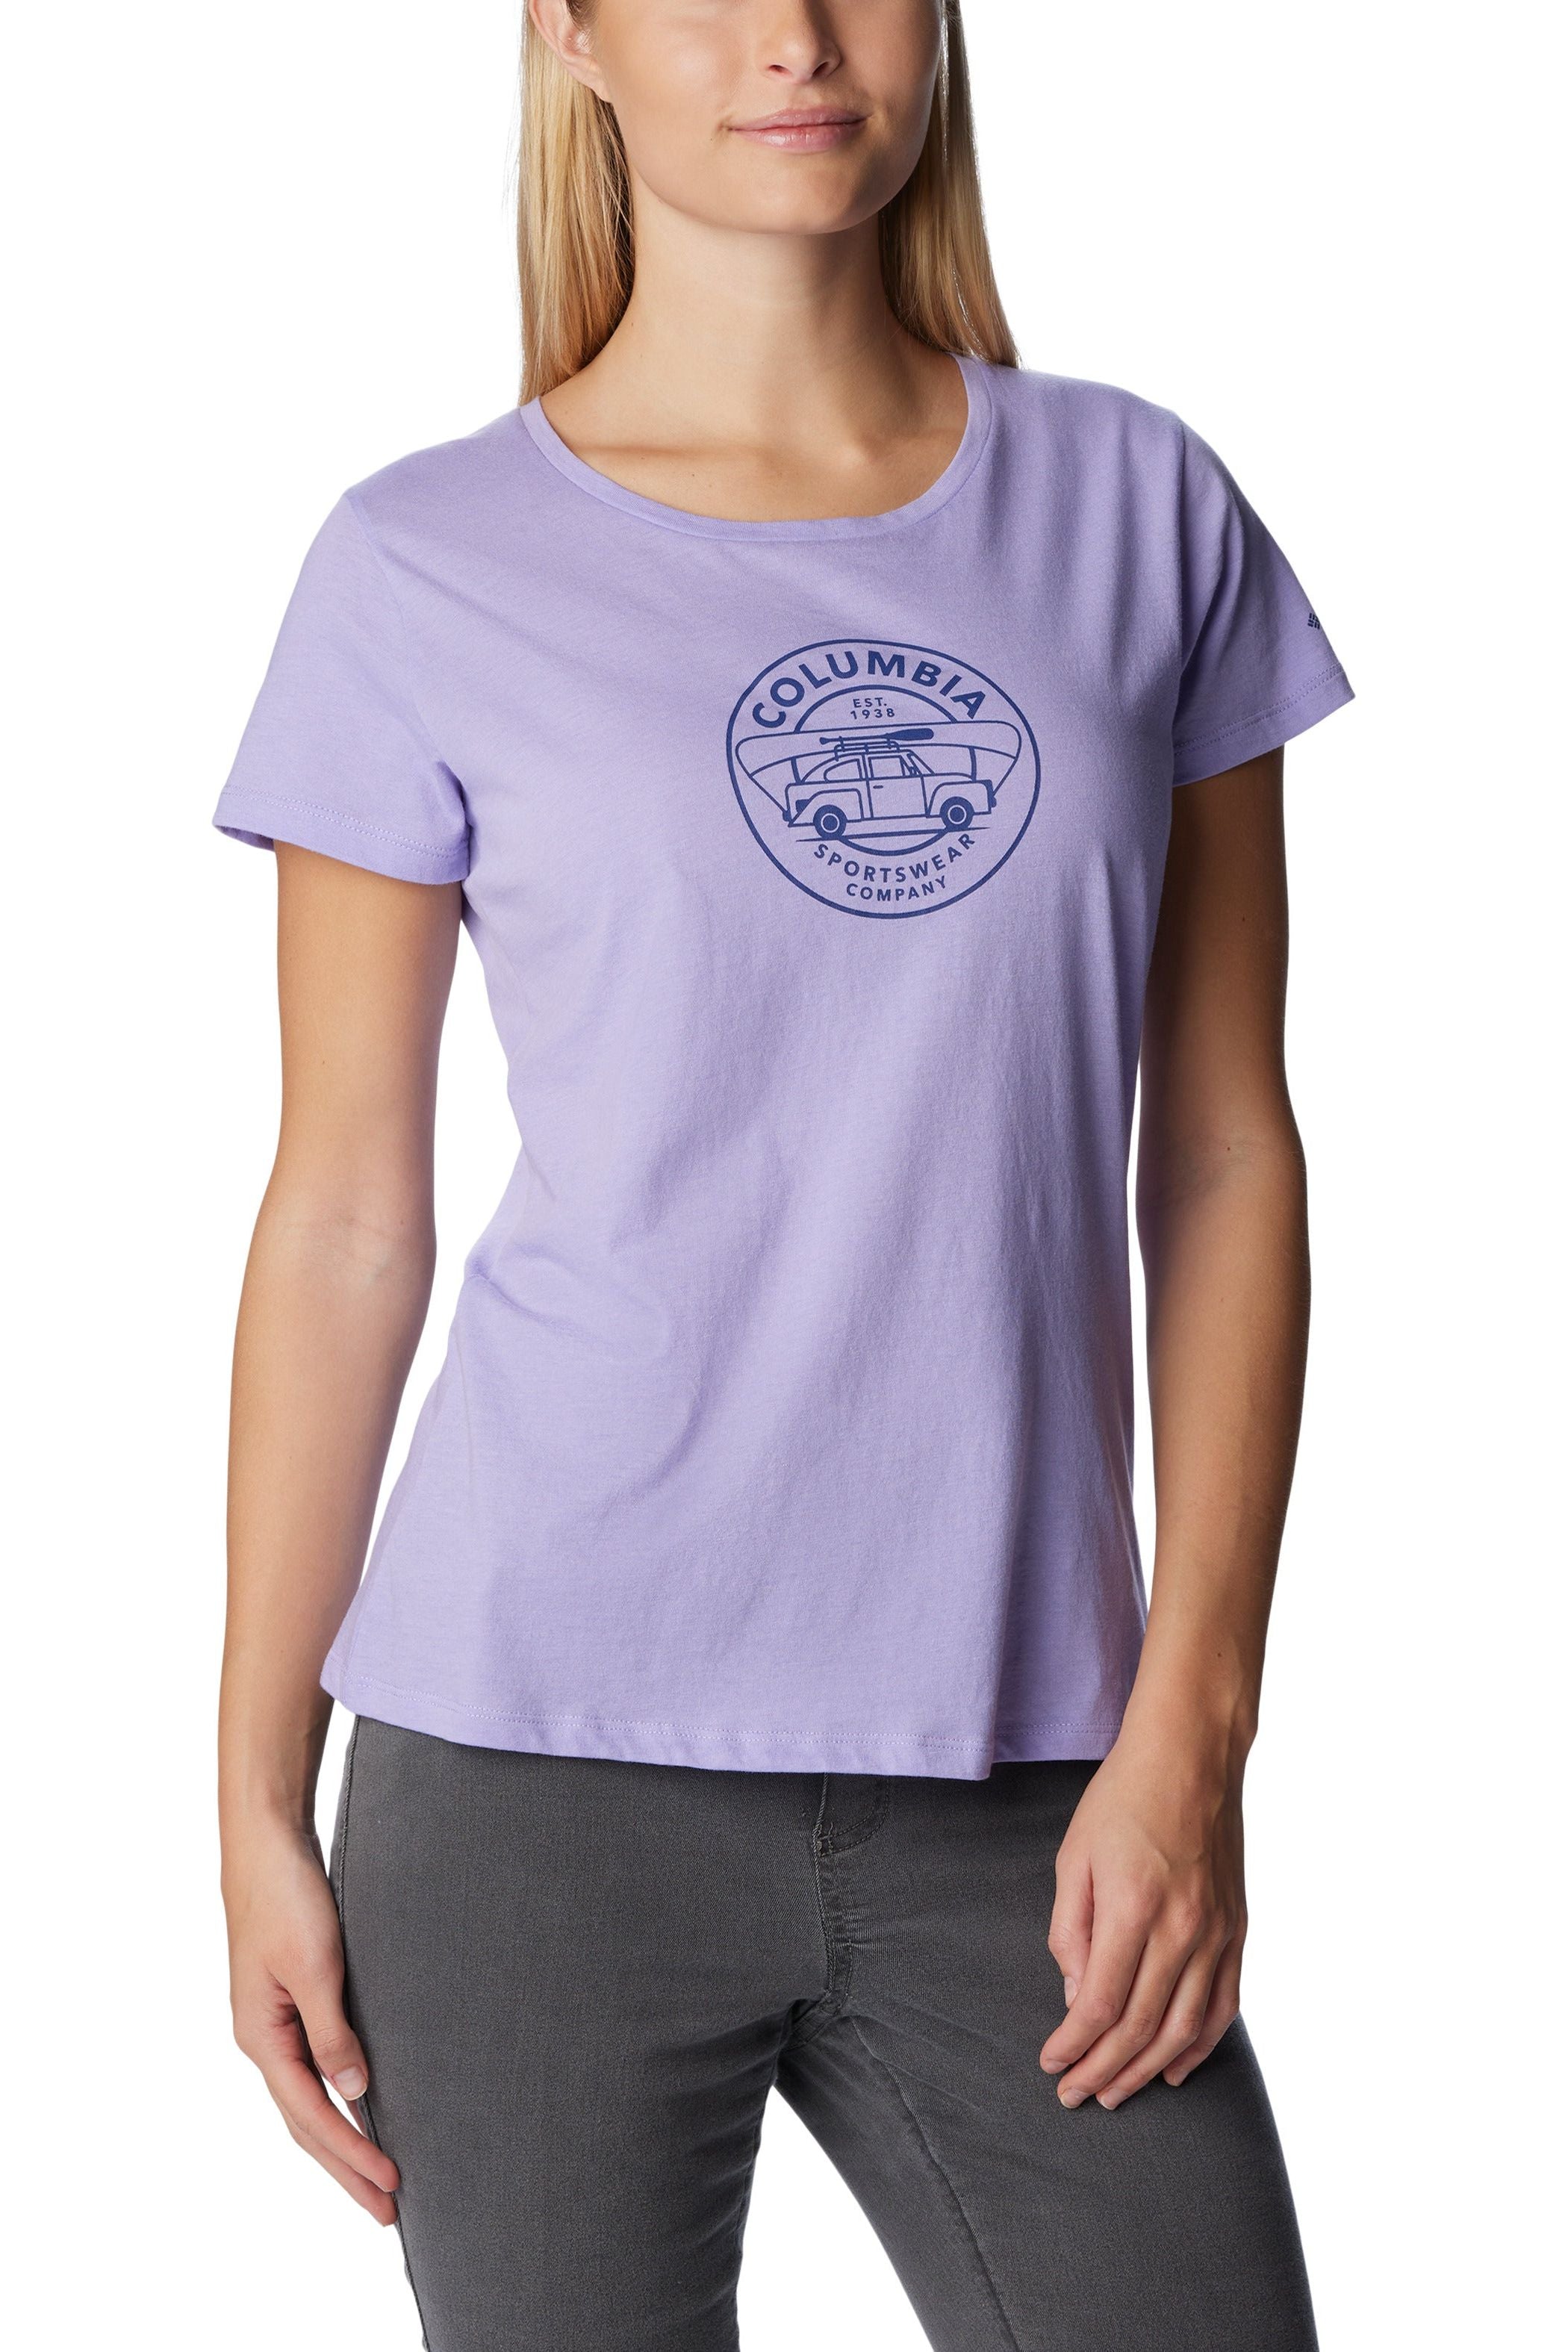 Columbia Daisy Days Graphic T-Shirt - Style 1934591, front2, frosted purple